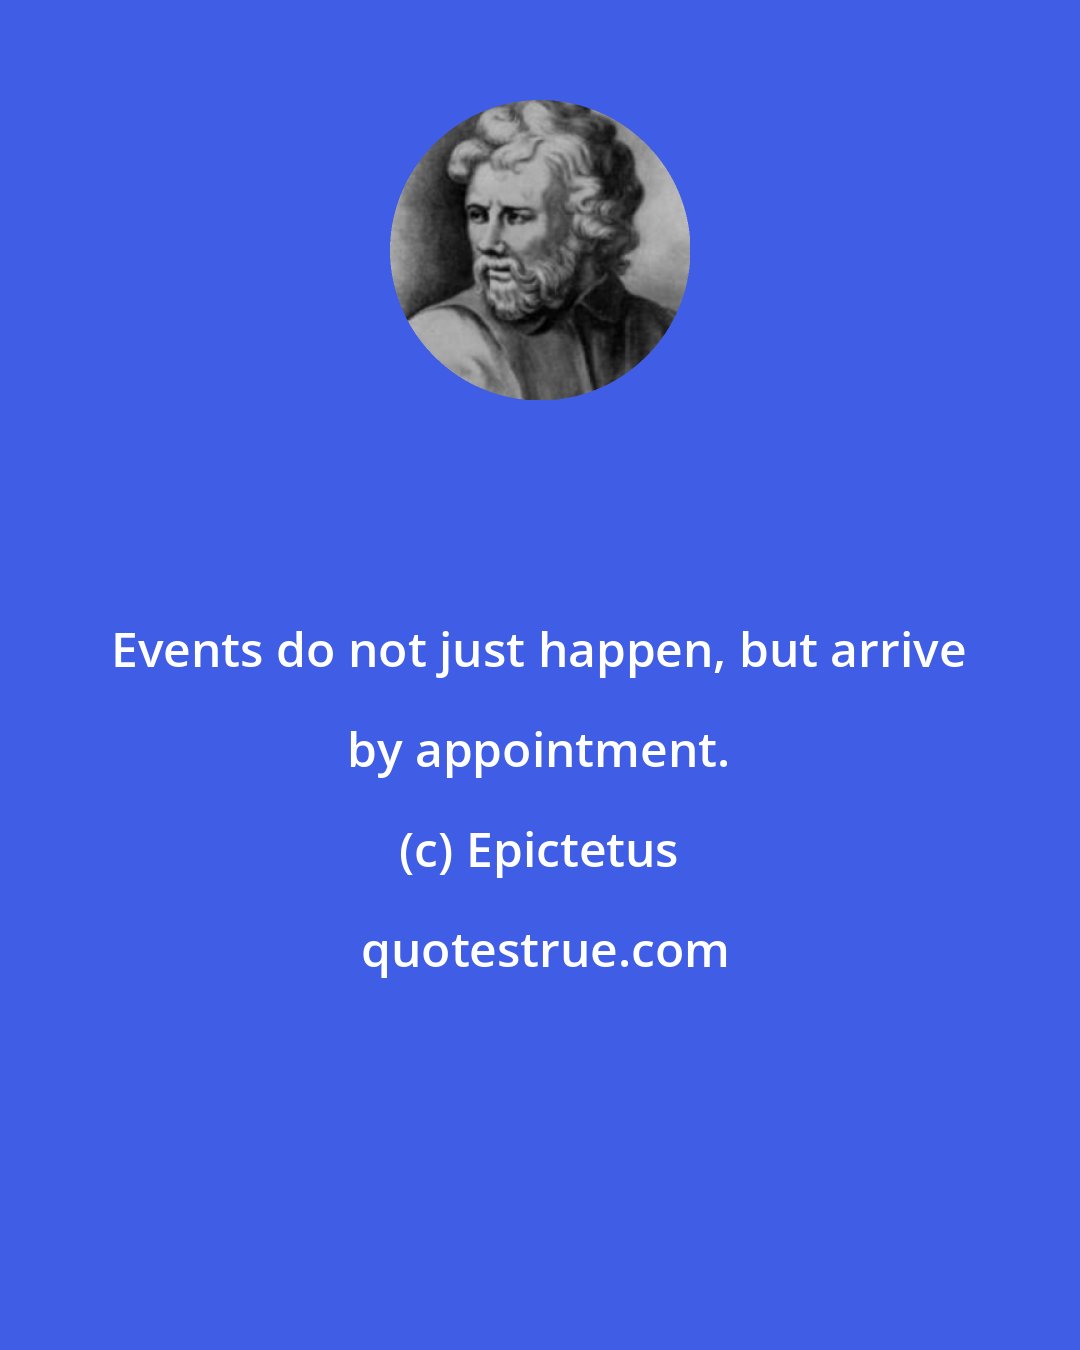 Epictetus: Events do not just happen, but arrive by appointment.